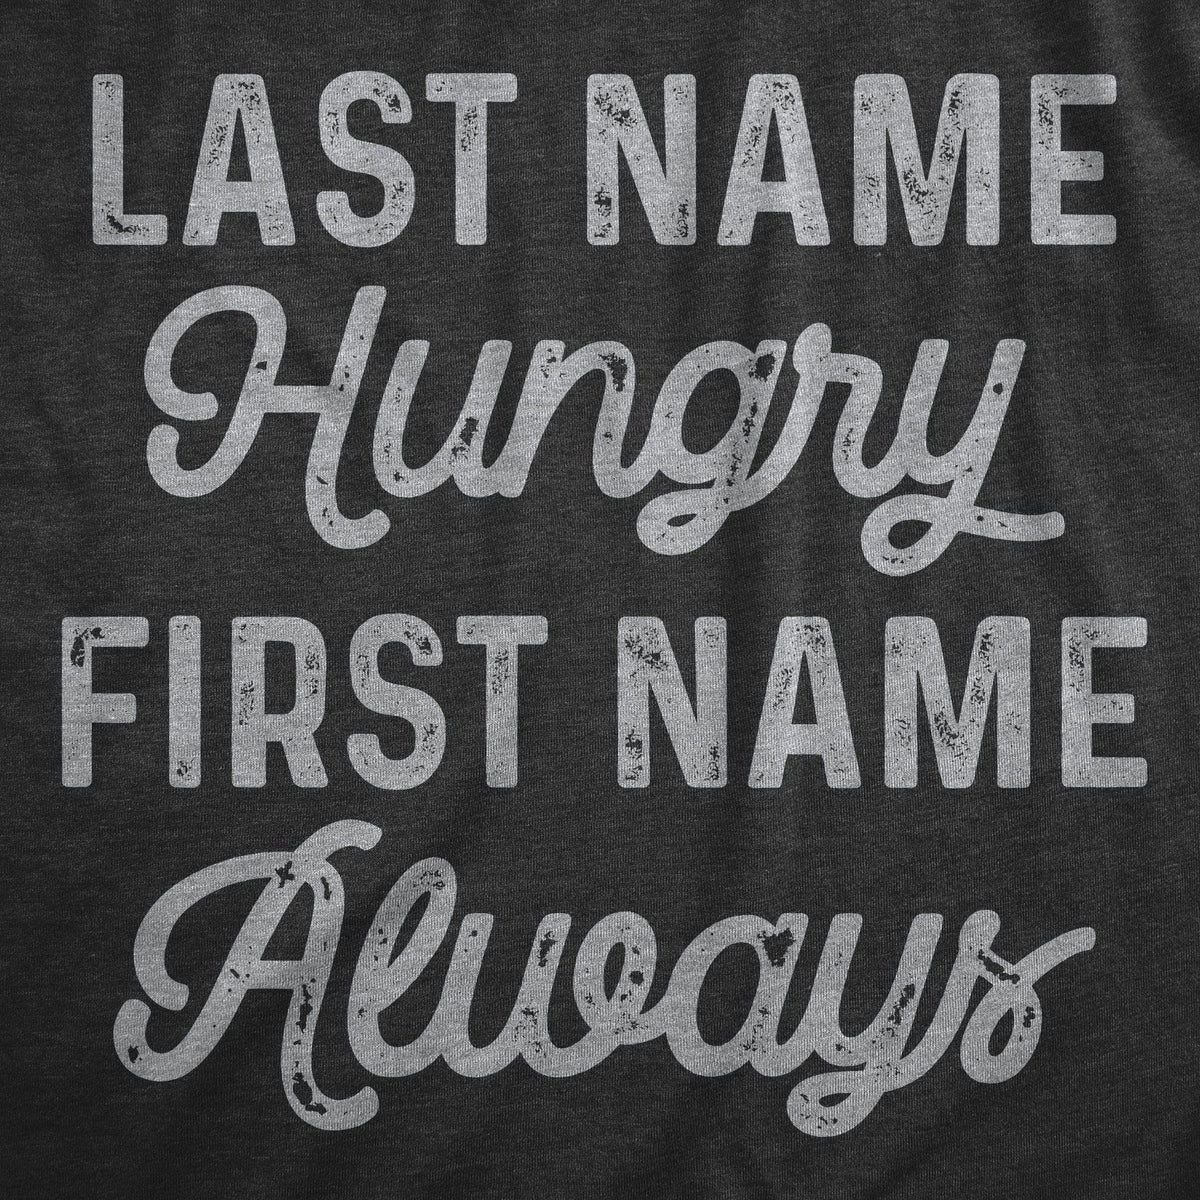 Last Name Hungry First Name Always Men&#39;s Tshirt  -  Crazy Dog T-Shirts